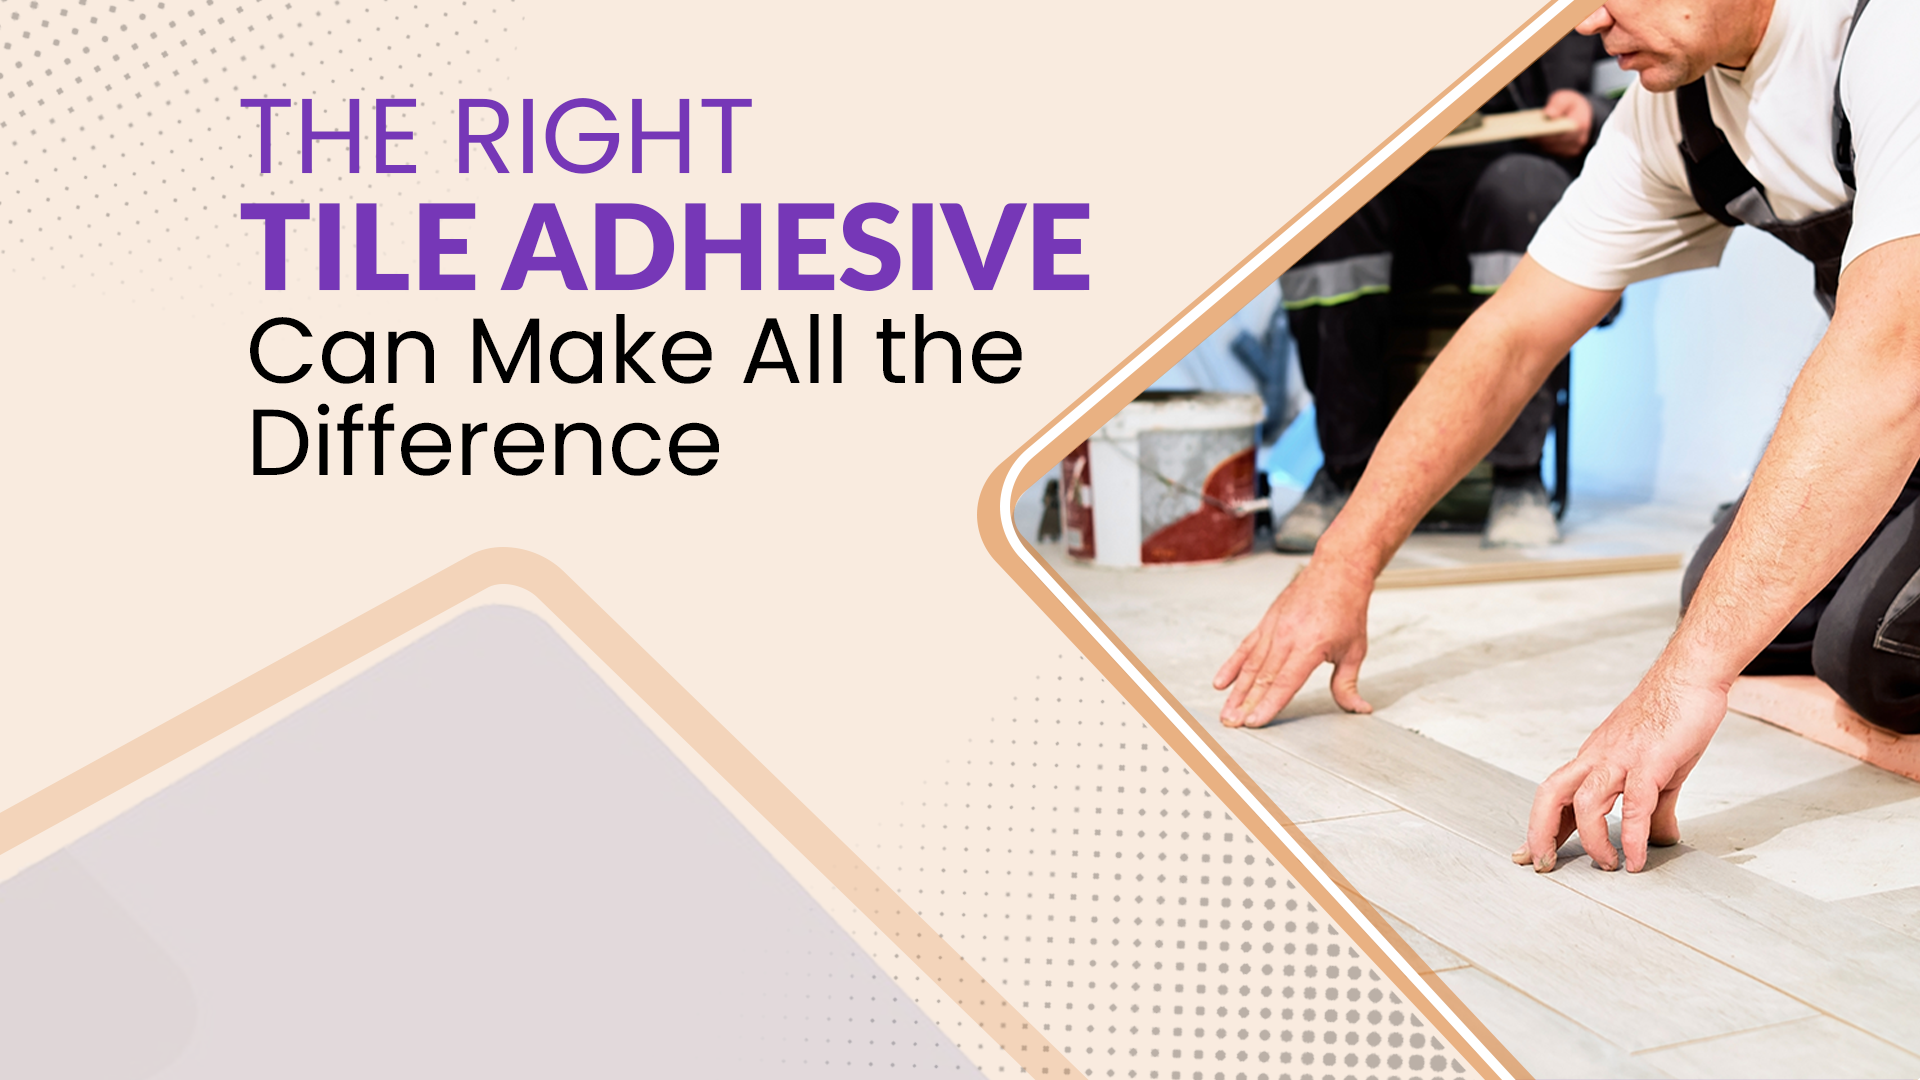 The Right Tile Adhesive Can Make All the Difference 